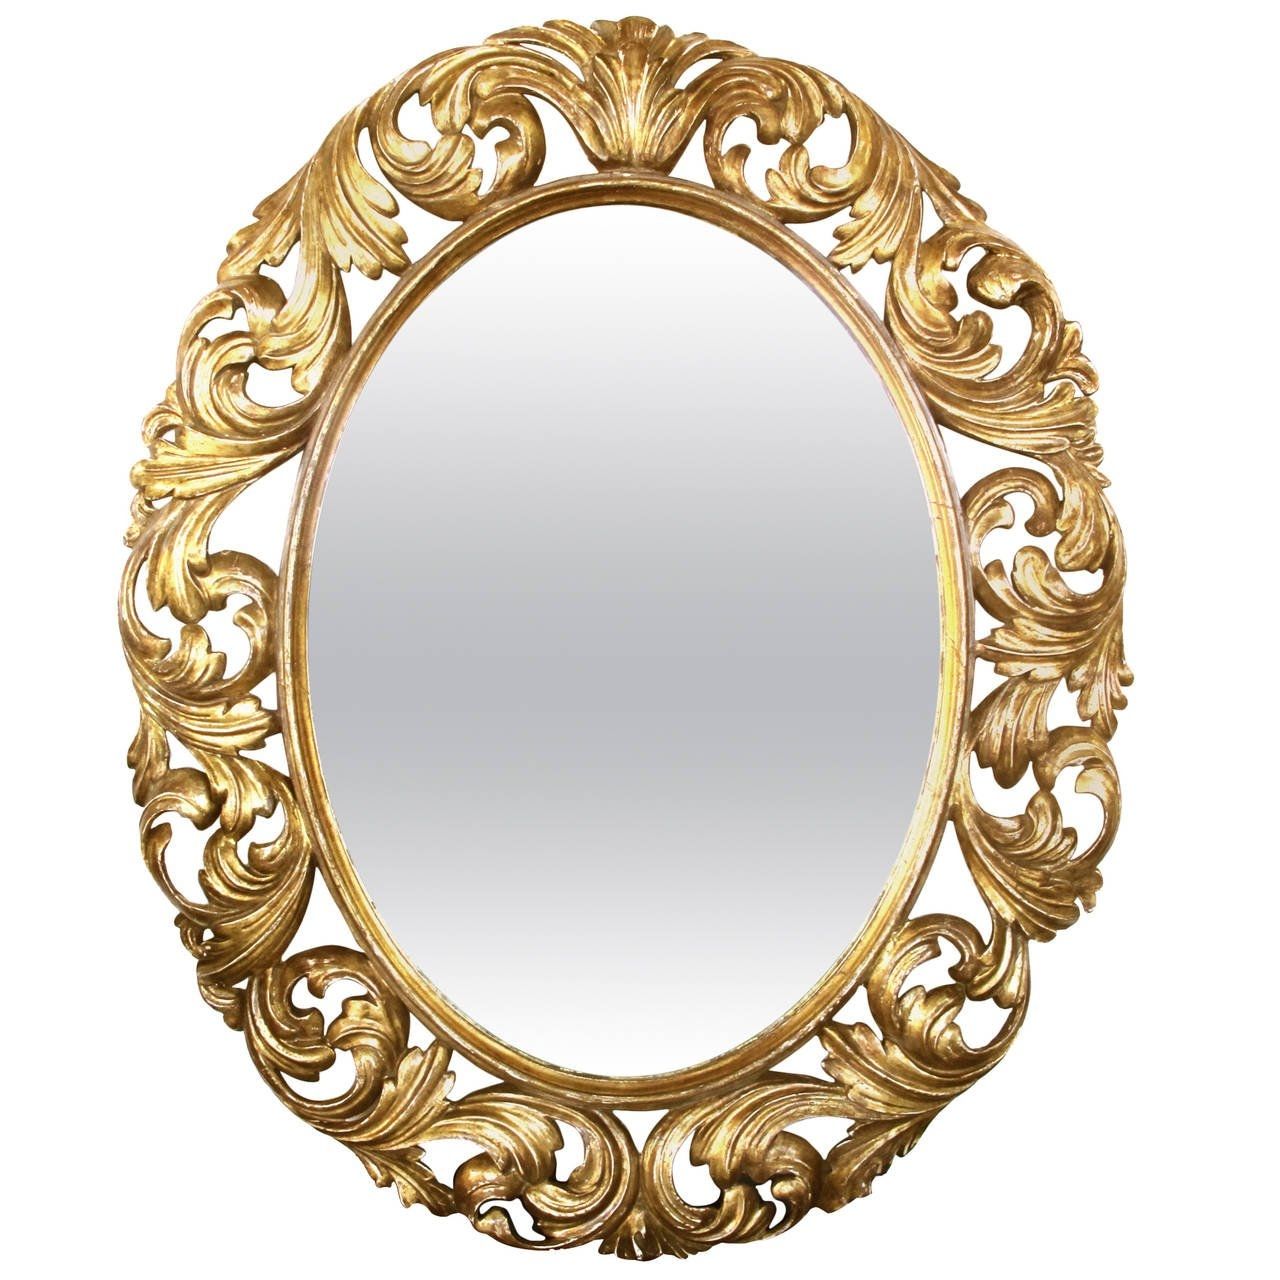 Well Carved Italian Baroque Style Oval Giltwood Mirror For Sale At Regarding Baroque Style Mirrors (View 7 of 15)